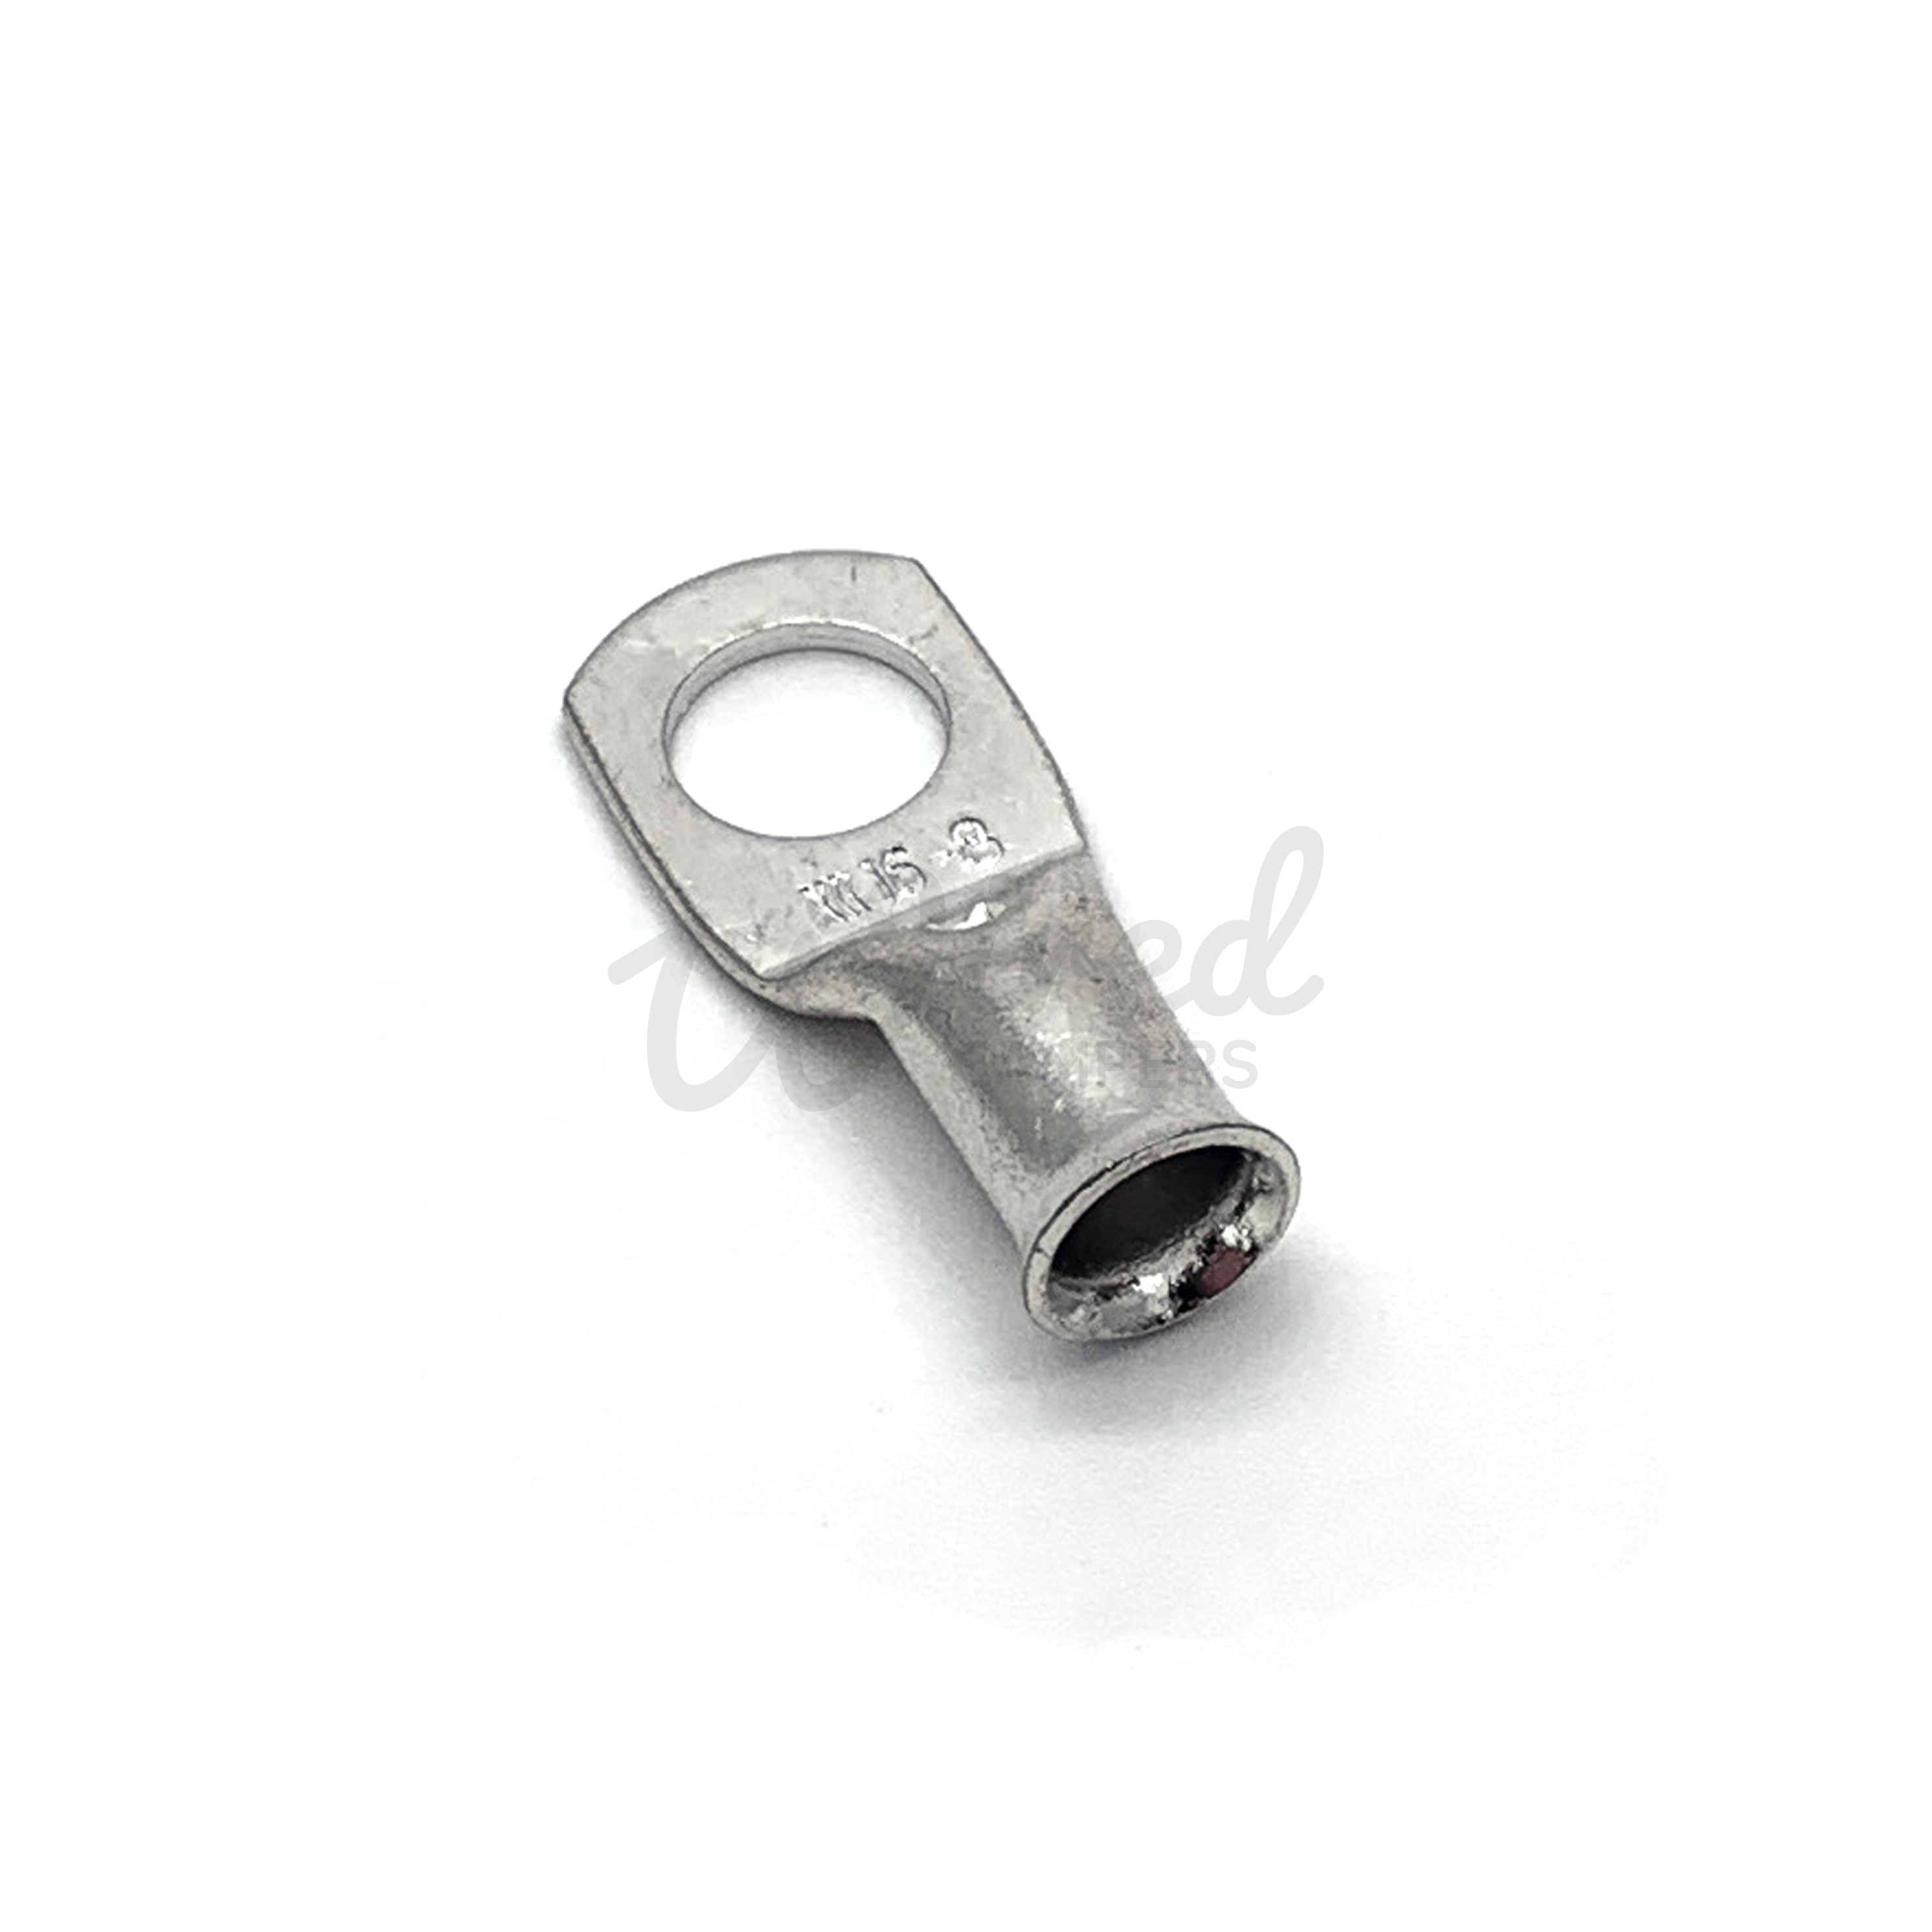 Wired Campers Limited 8mm 10 Pack - Copper Tube Crimp Ring Terminals 16mm² Cable Entry - 6mm/8mm/10mm/12mm Hole